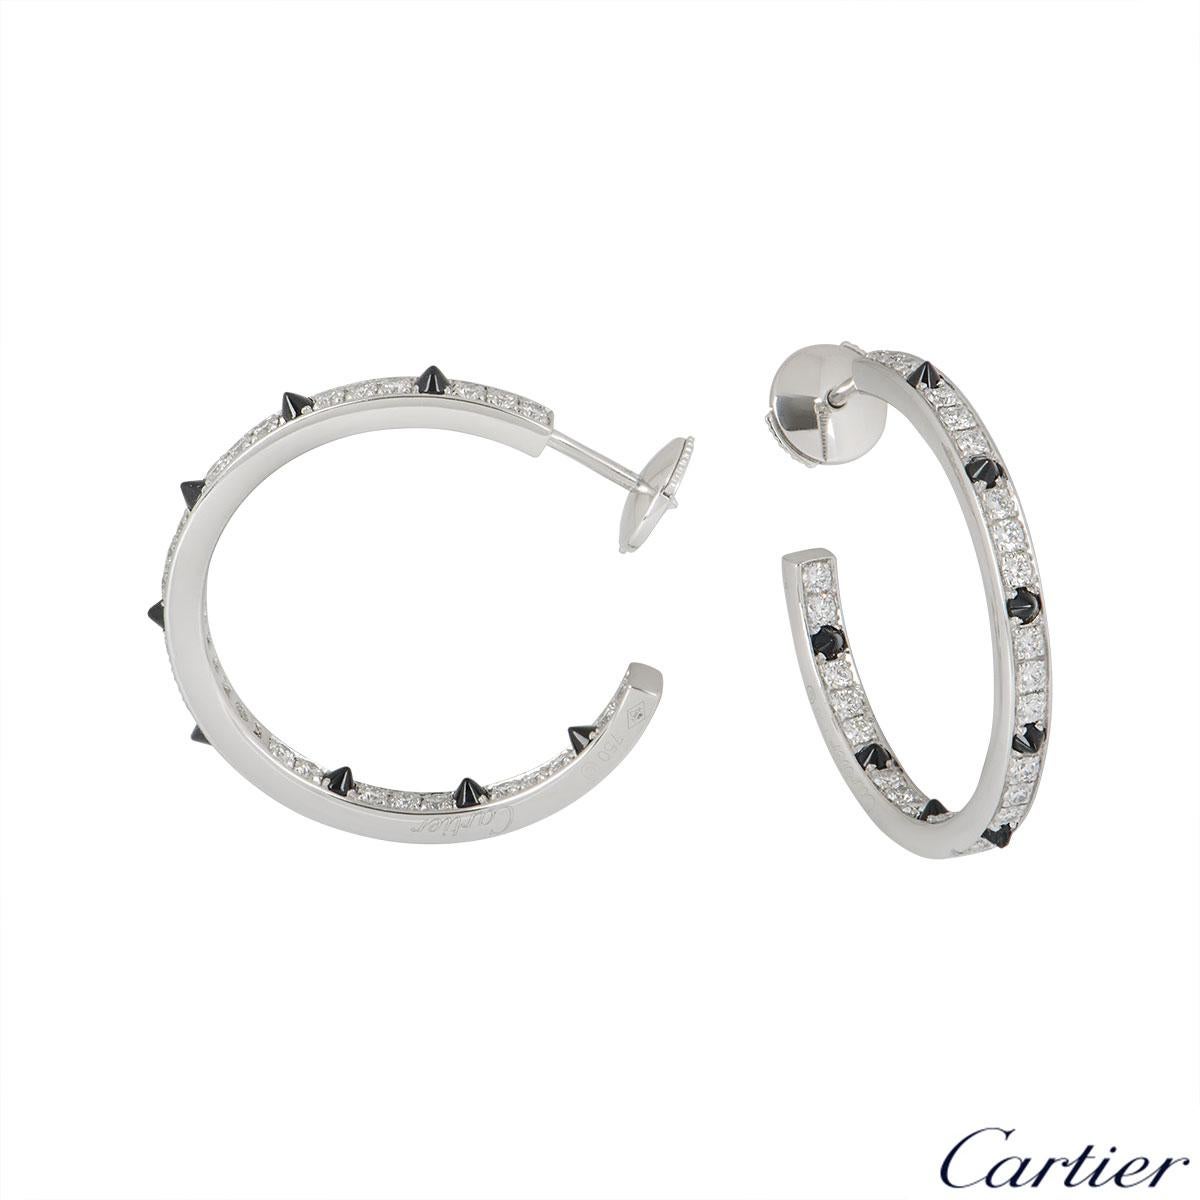 An 18k white gold pair of diamond and onyx earrings by Cartier from the Panthere De Cartier collection. The earrings are set with pave round brilliant cut diamonds and onyx spikes on either side of the hoops. The 52 diamonds have an approximate